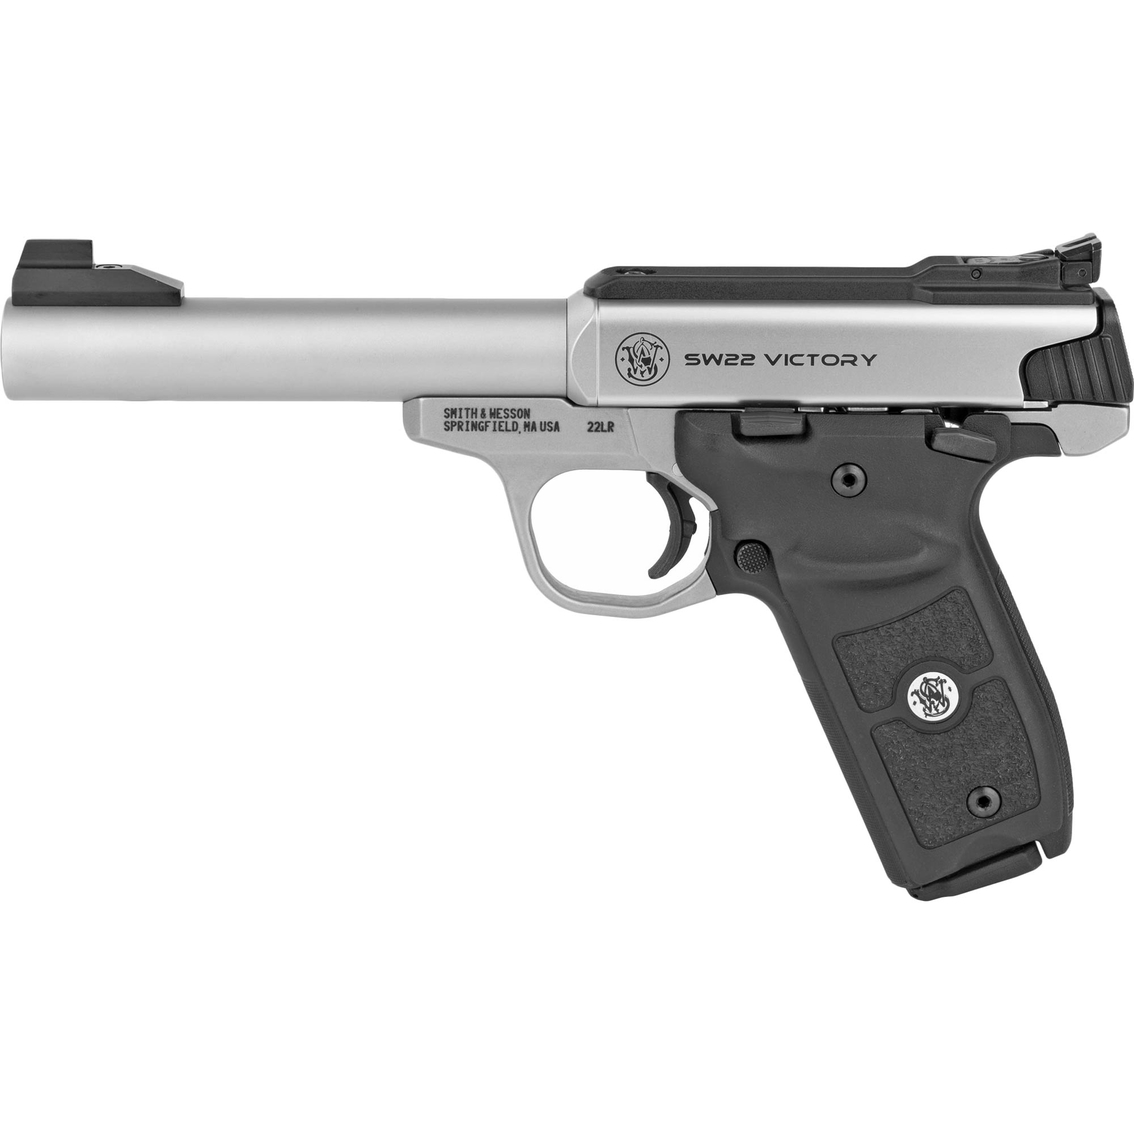 S&W Victory Target 22 LR 5.5 in. Barrel 10 Rds Pistol Stainless Steel - Image 2 of 3